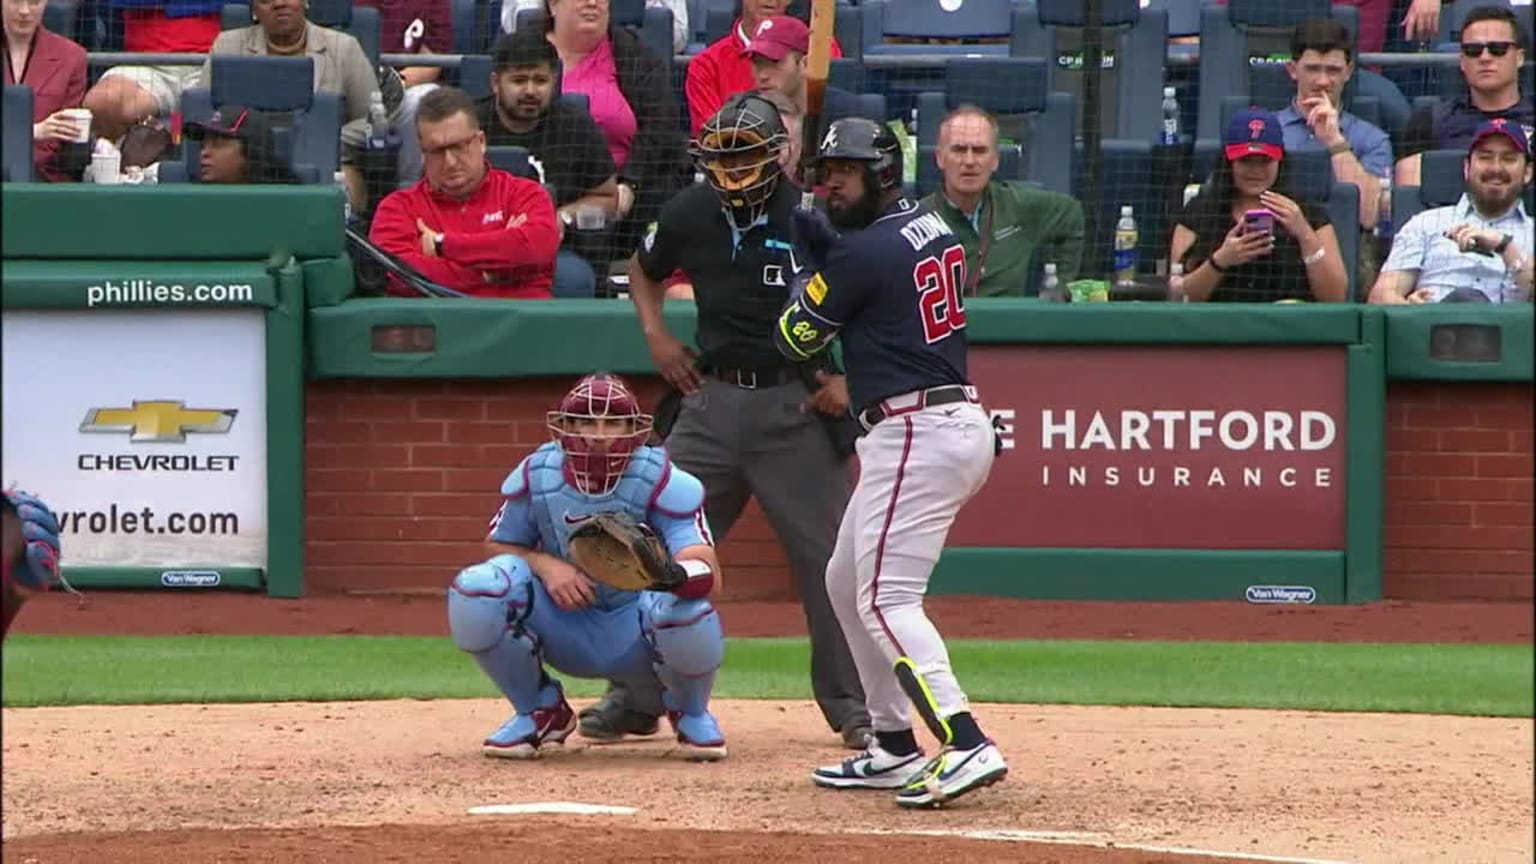 Marcell Ozuna's 2-run homer makes it 7-0 Braves over the Mets.